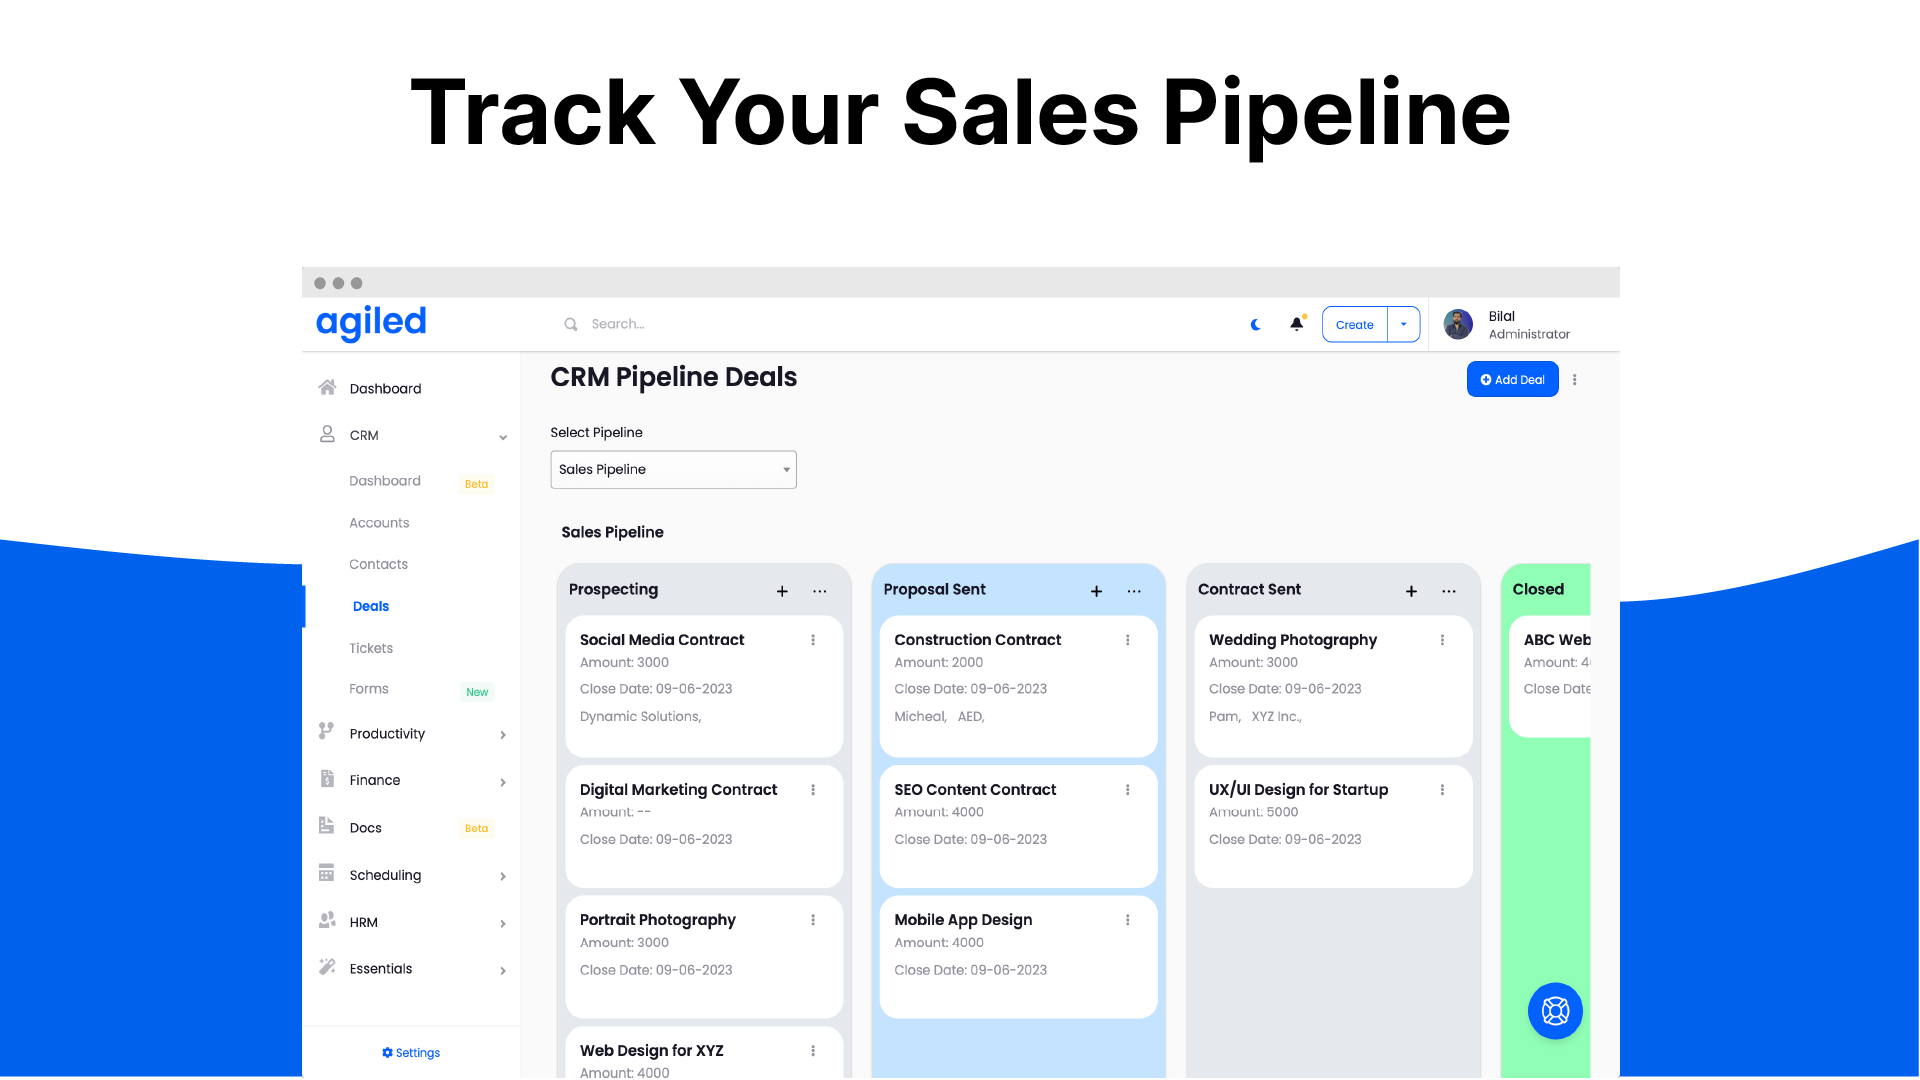 CRM and sales pipeline